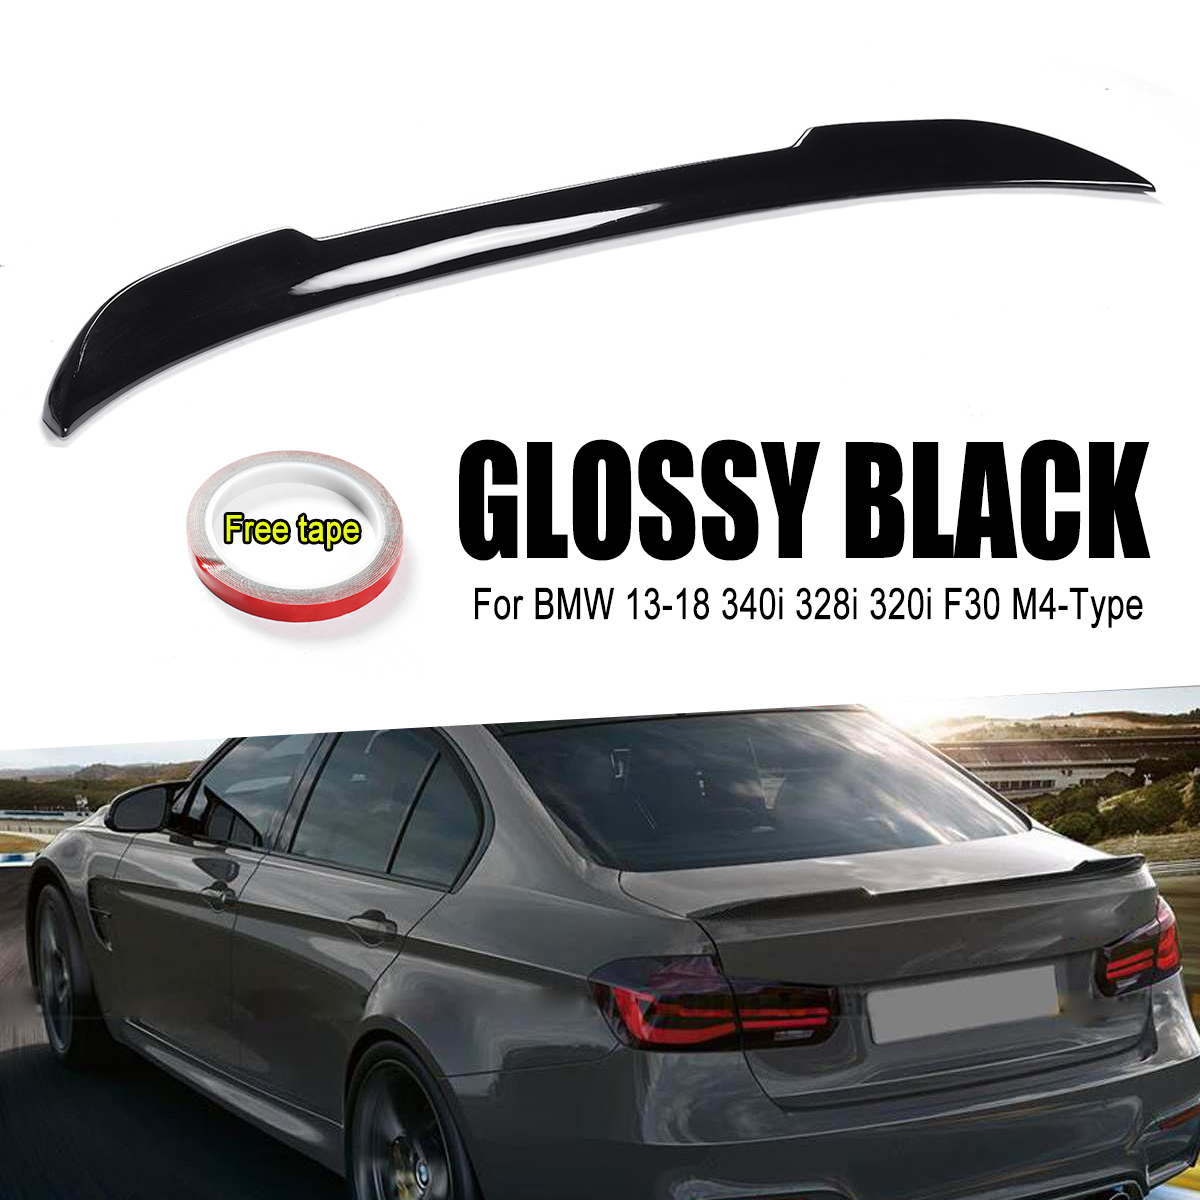 PAINTED #475 Fit For BMW 3ER F30 F80 4DR P Type Type REAR TRUNK SPOILER 320i 